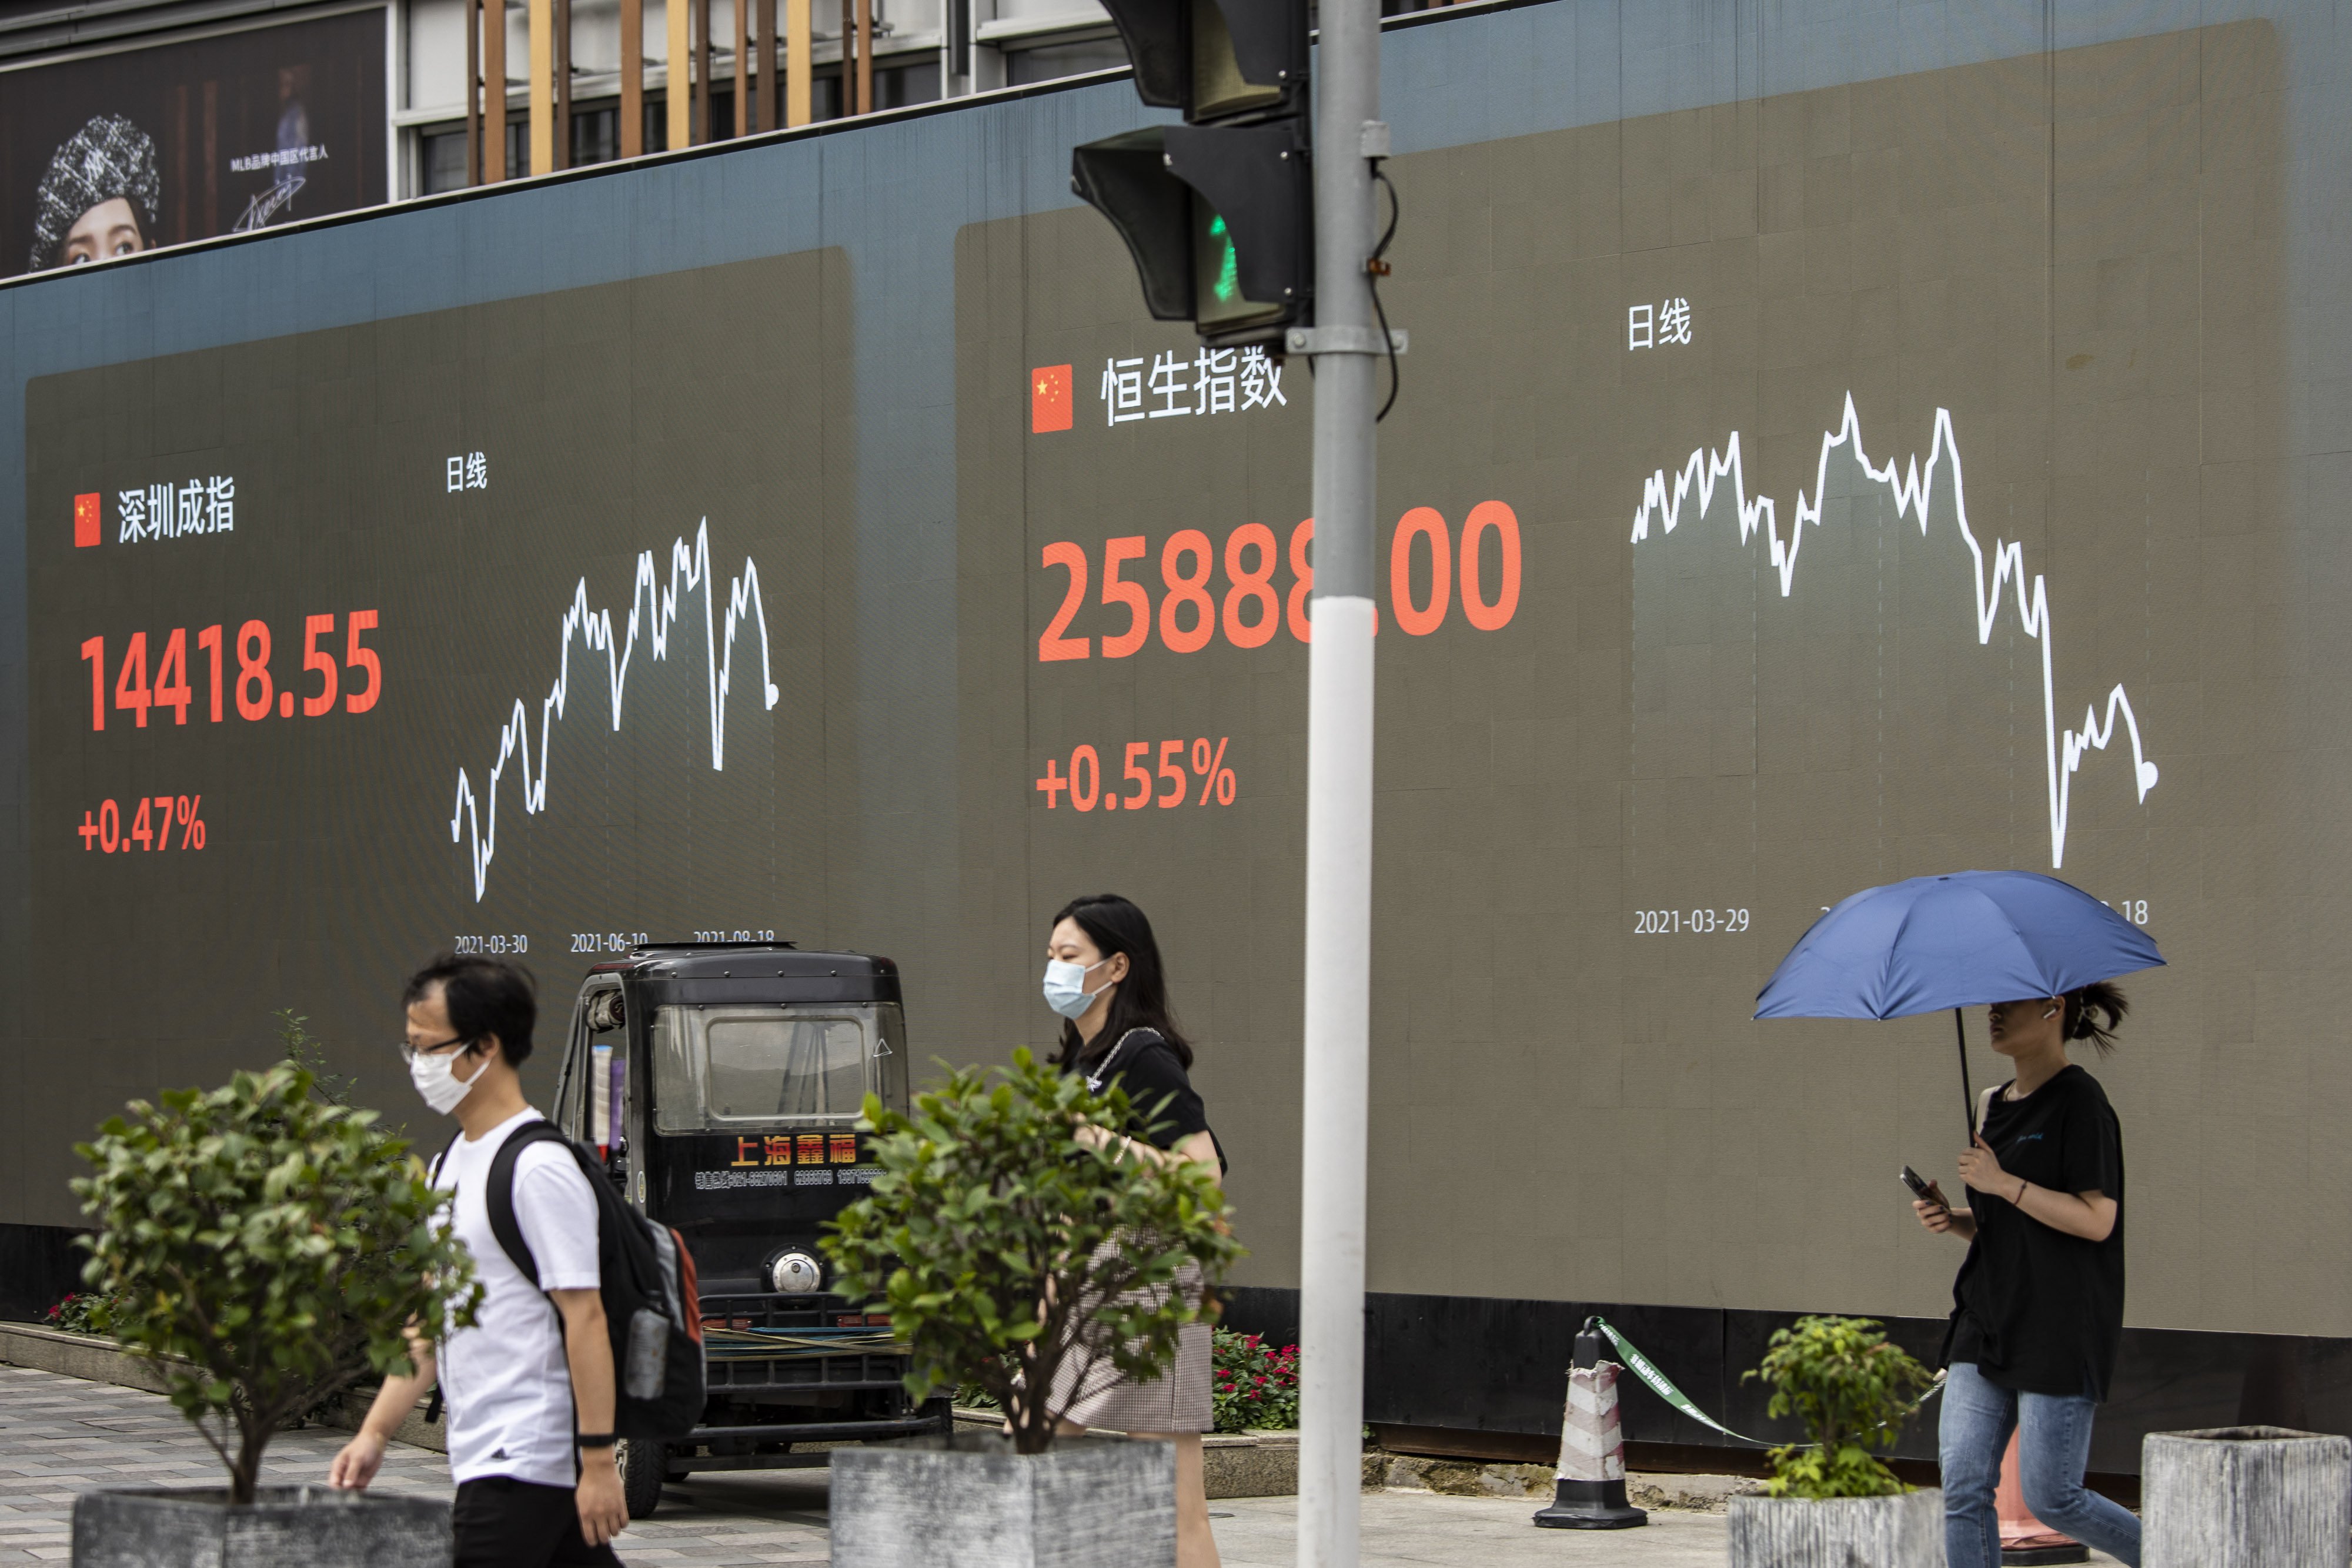 Pedestrians pass a screen displaying the Shenzhen Stock Exchange and the Hang Seng Index figures in Shanghai, China. Photo: Bloomberg